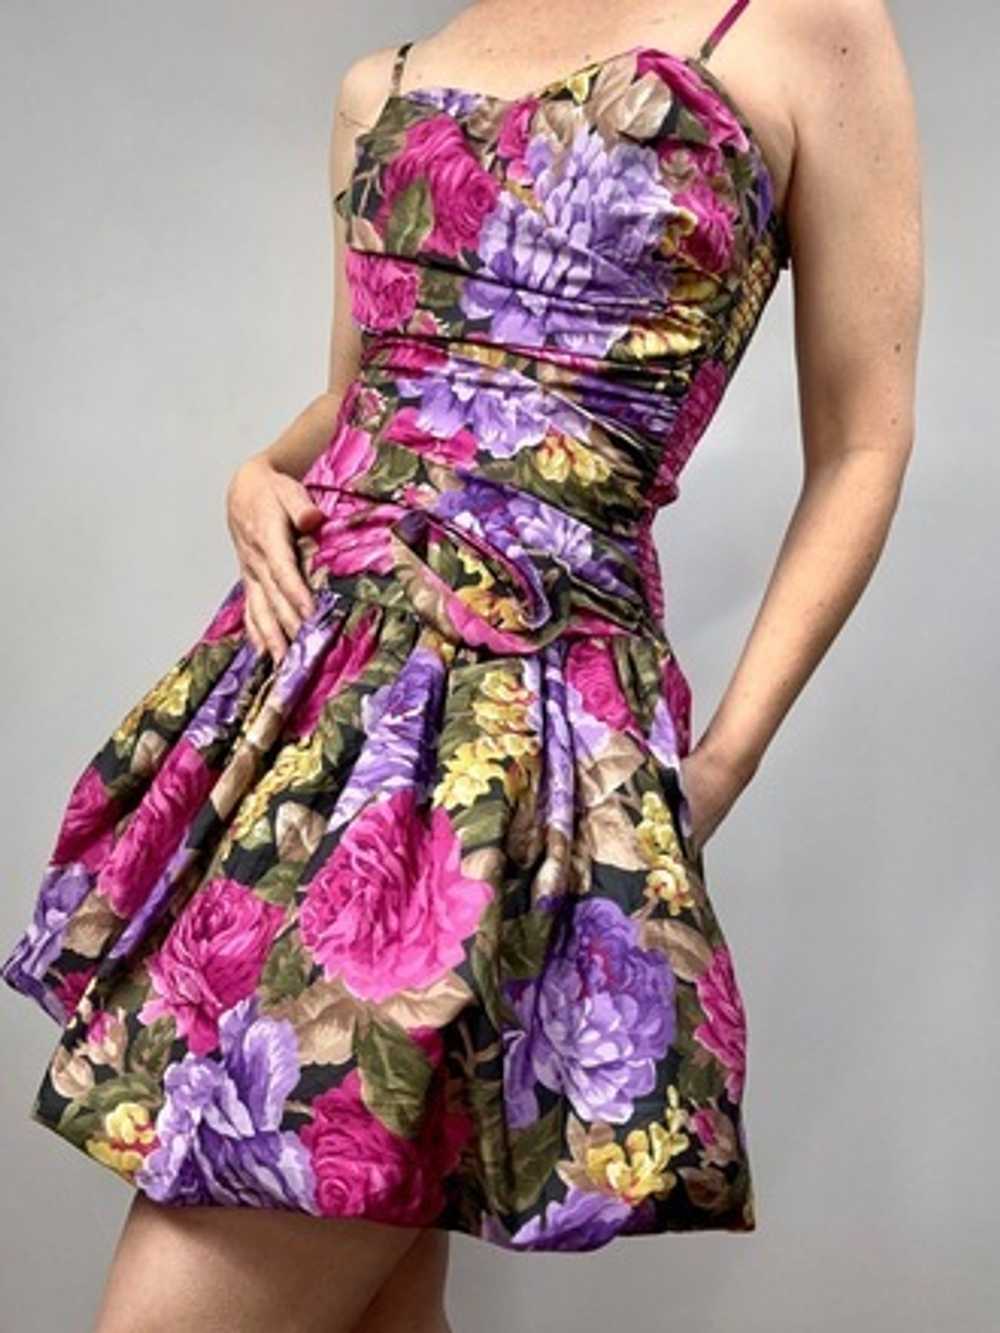 Pristine 90’s Floral Balloon Skirt Party Dress - image 2